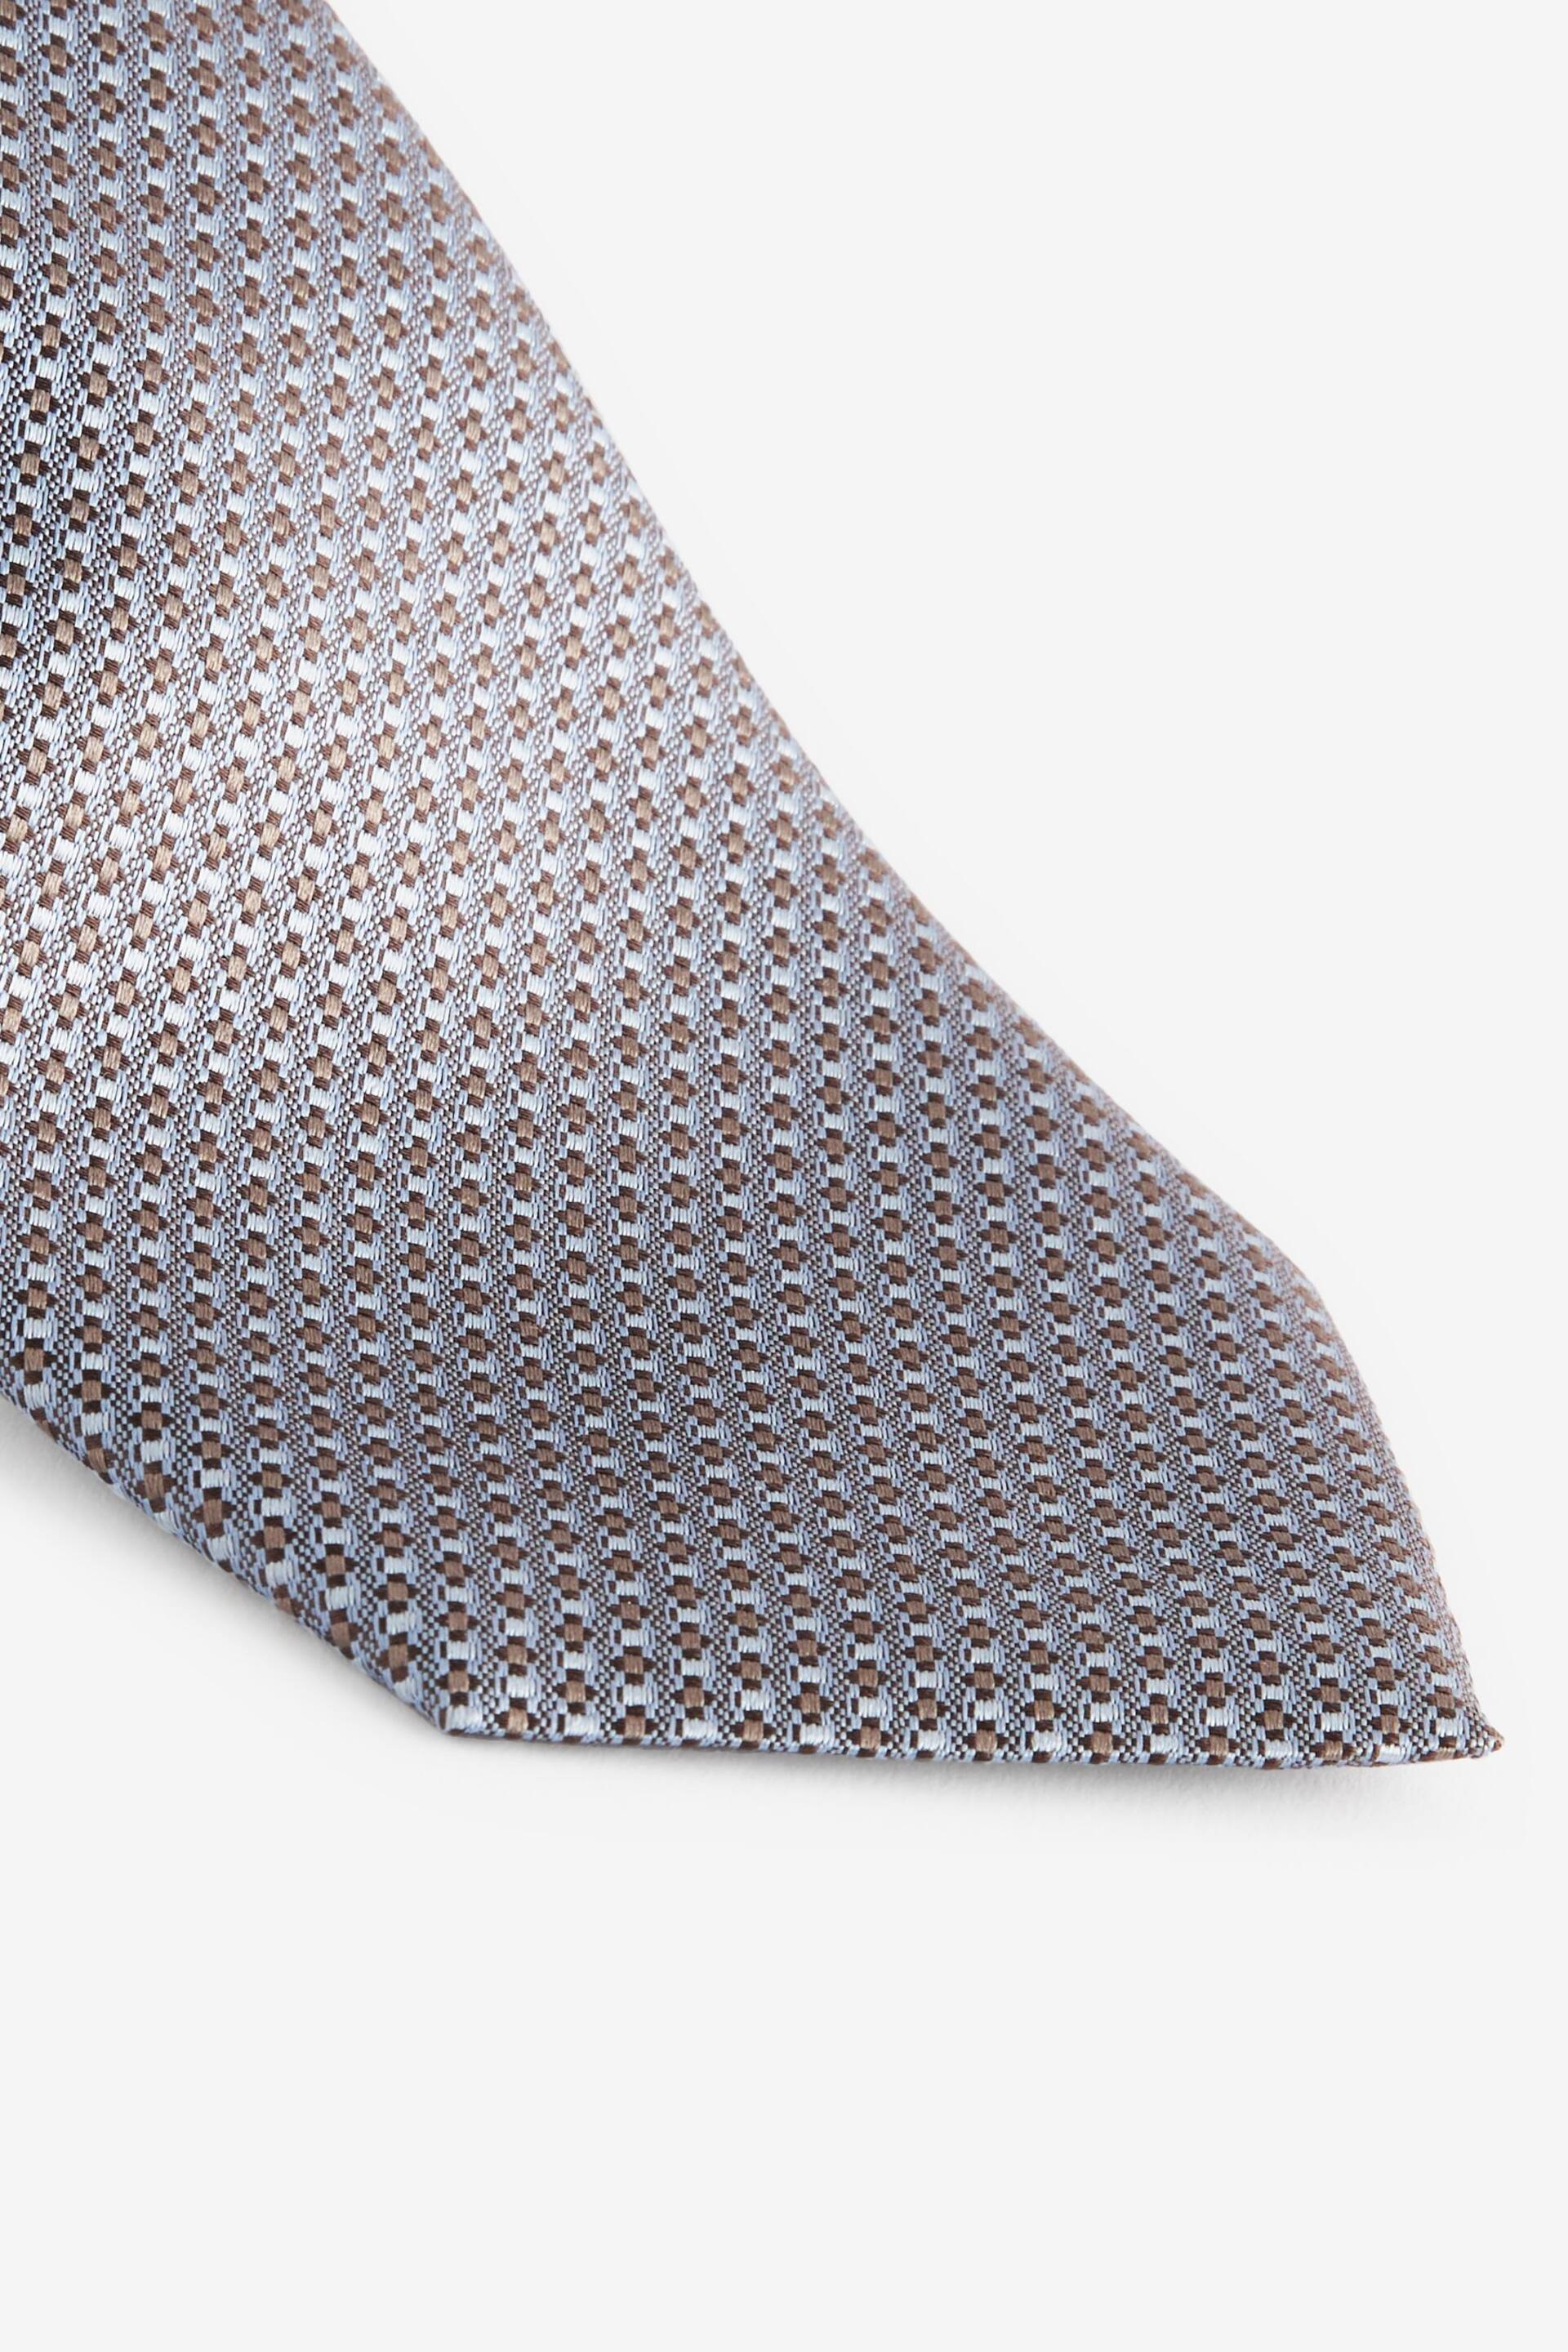 Neutral Brown/Light Blue Signature Made In Italy Tie - Image 2 of 3